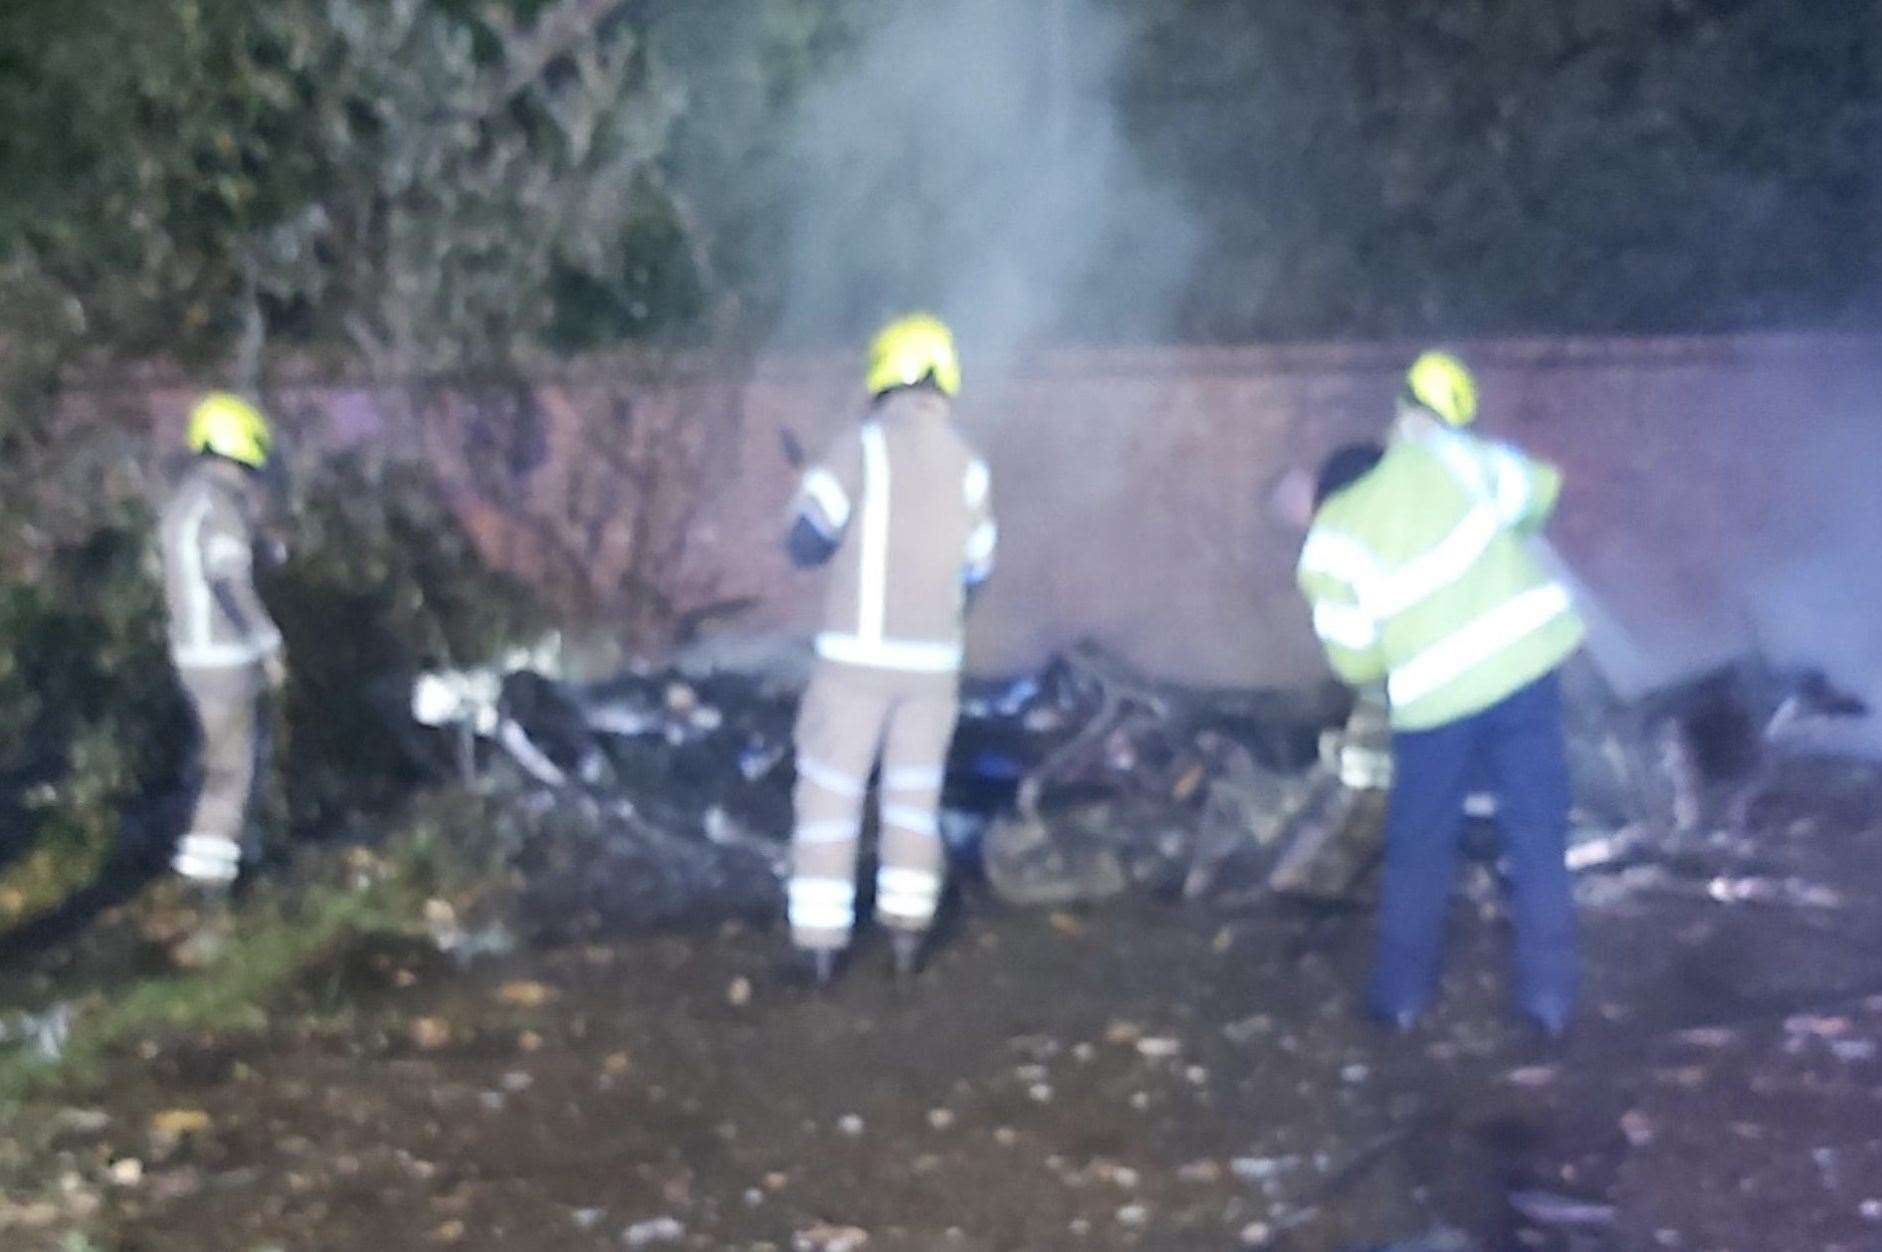 Two fire engines attended the scene near Sittingbourne High Street at midnight on Saturday night